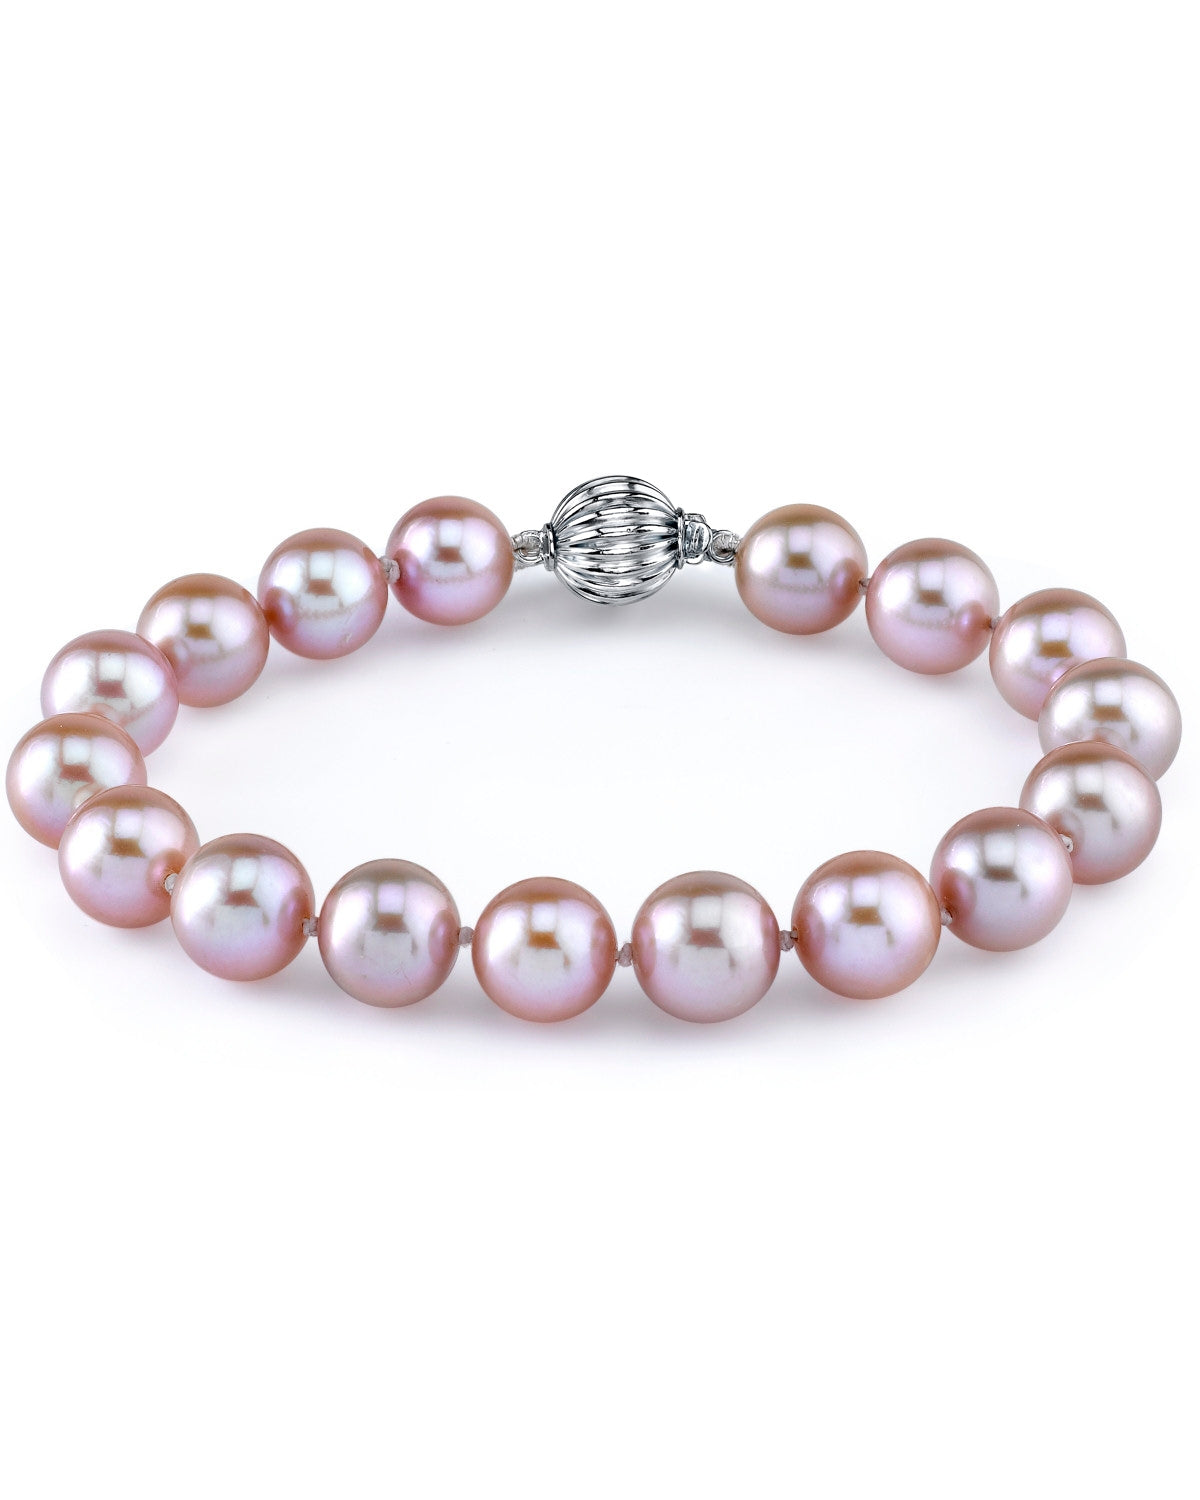 6.5-7.0mm Pink Freshwater Pearl Bracelet - AAA Quality